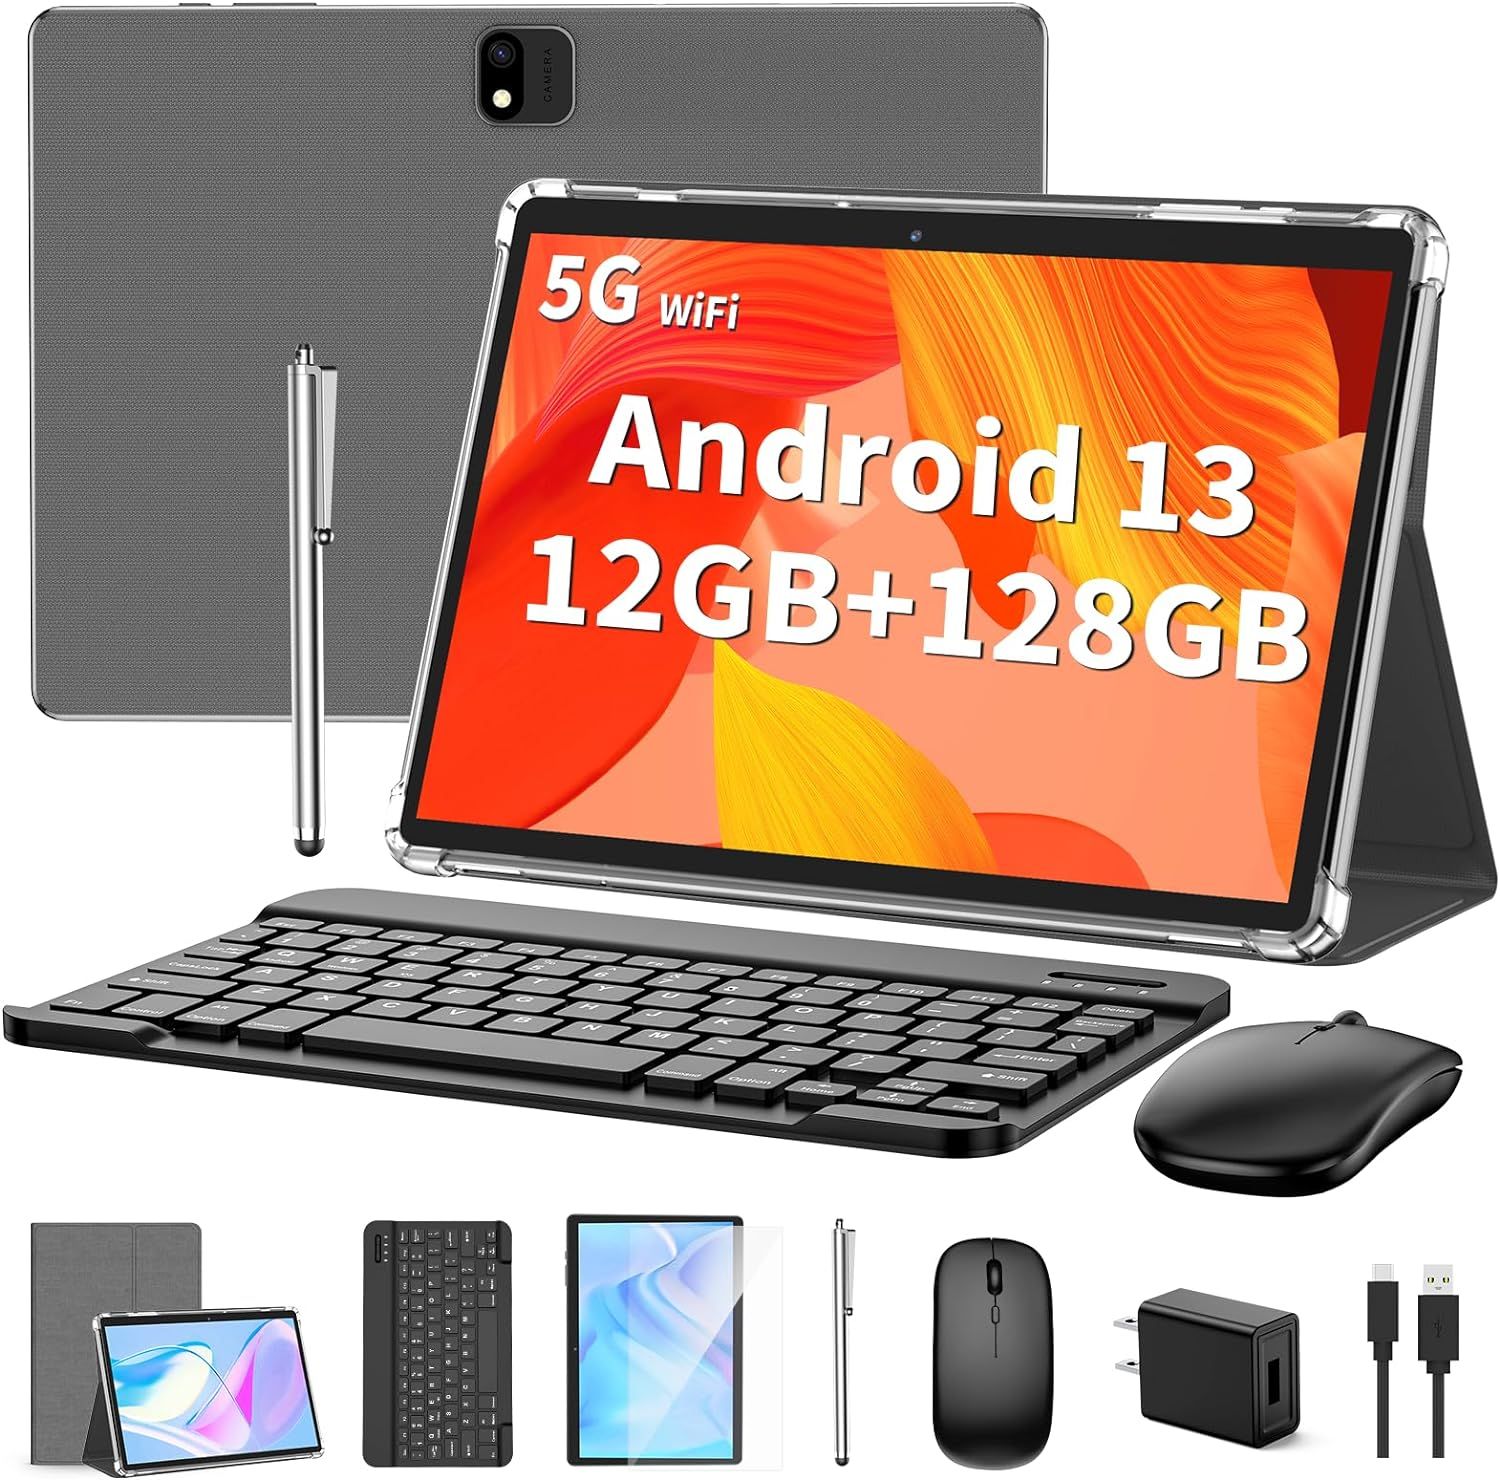 QDDQ Android 13 Tablet with Keyboard